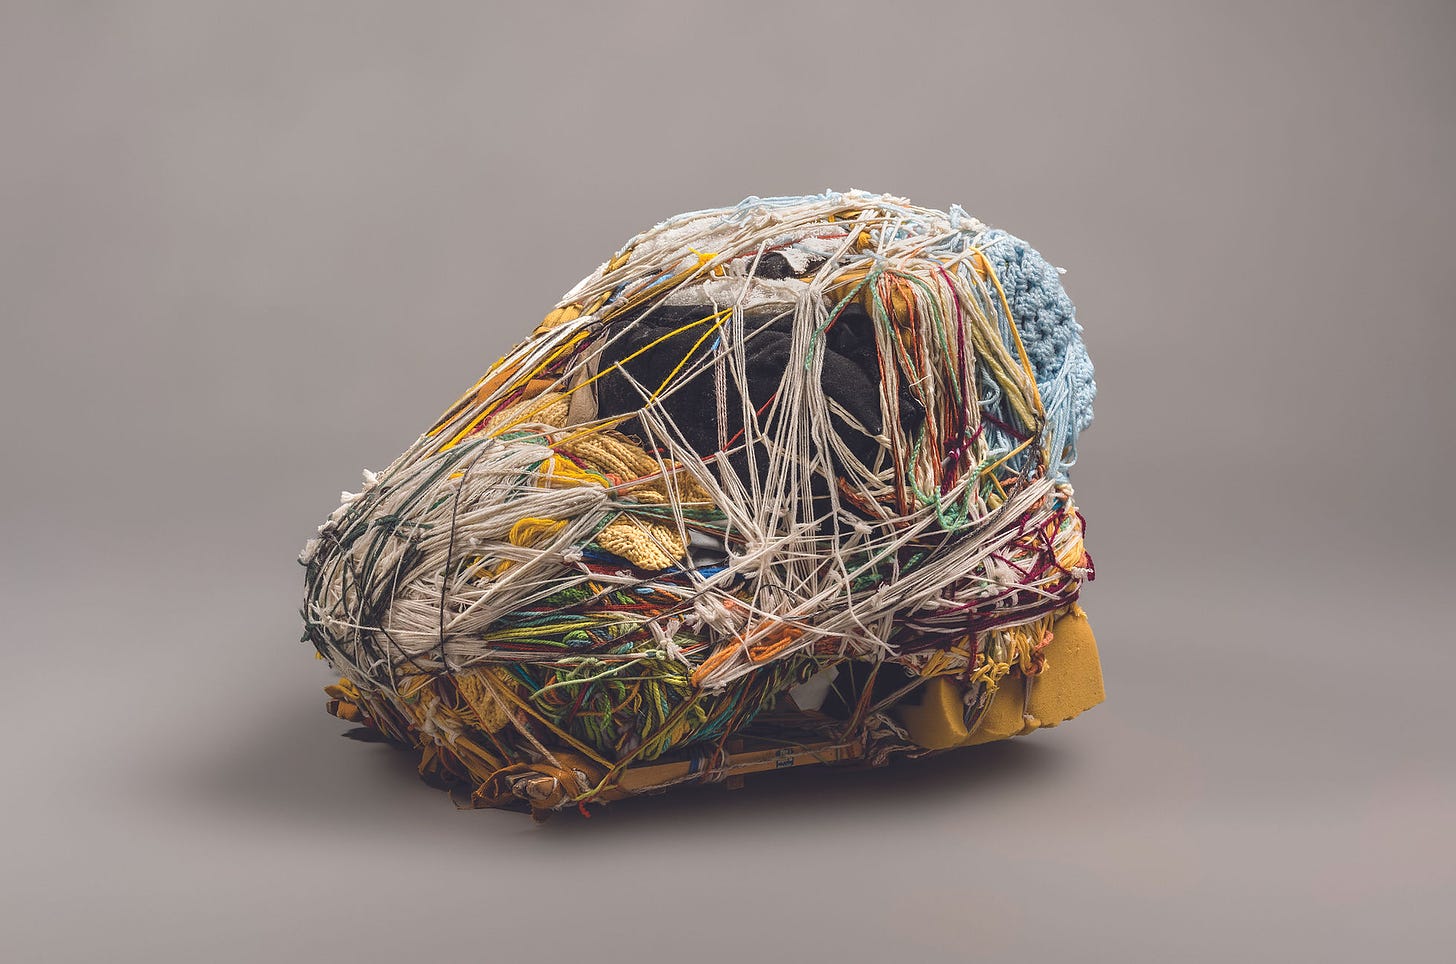 A fiber work by Judith Scott shows many threads pulled over an object of uncertain size.